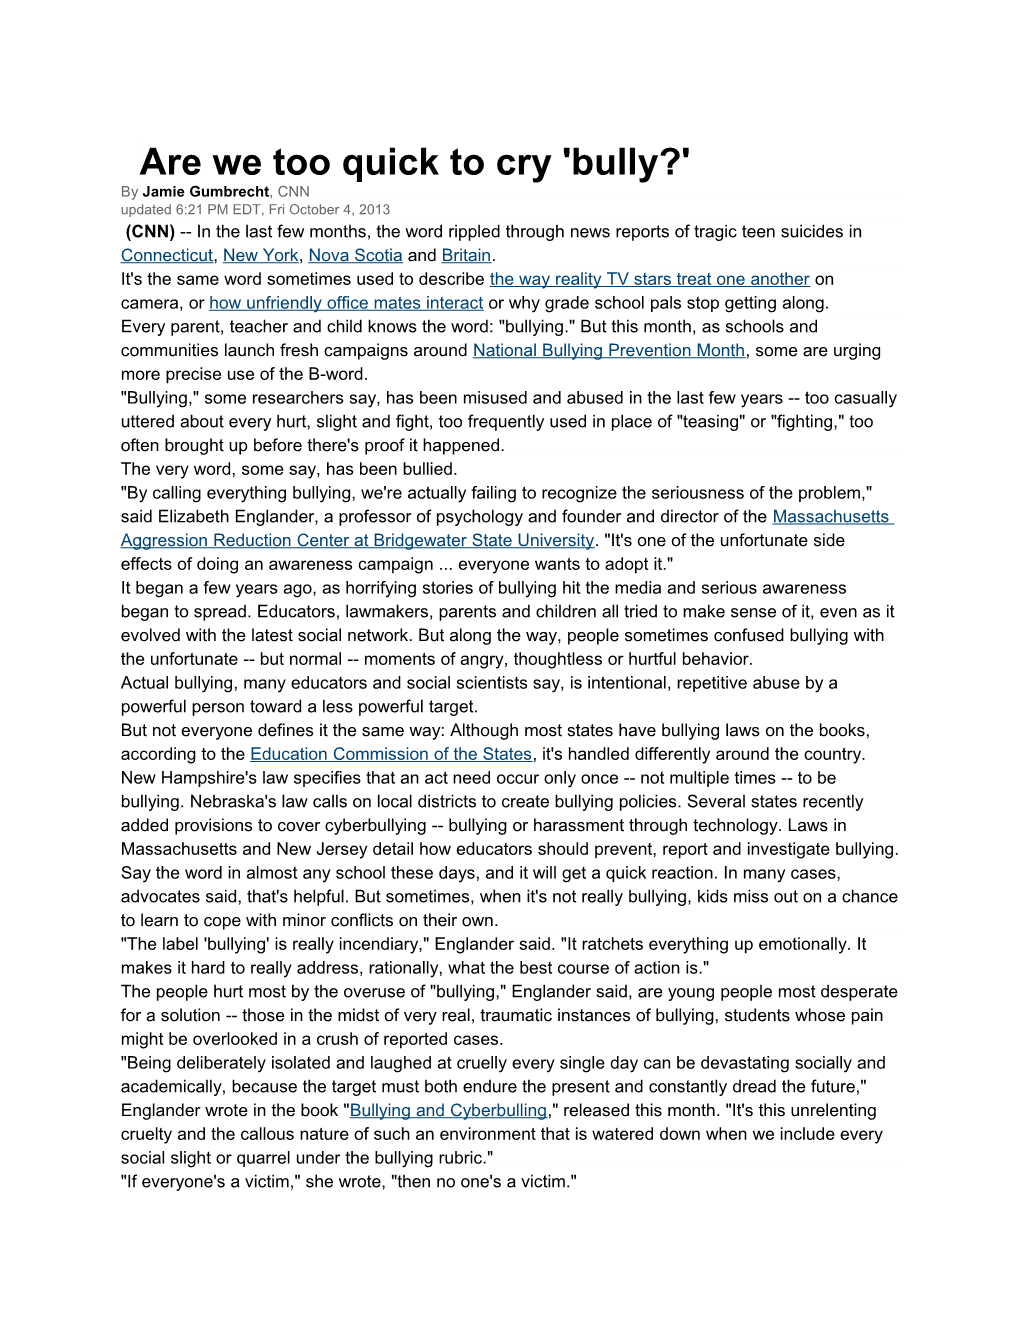 Are We Too Quick to Cry 'Bully?'